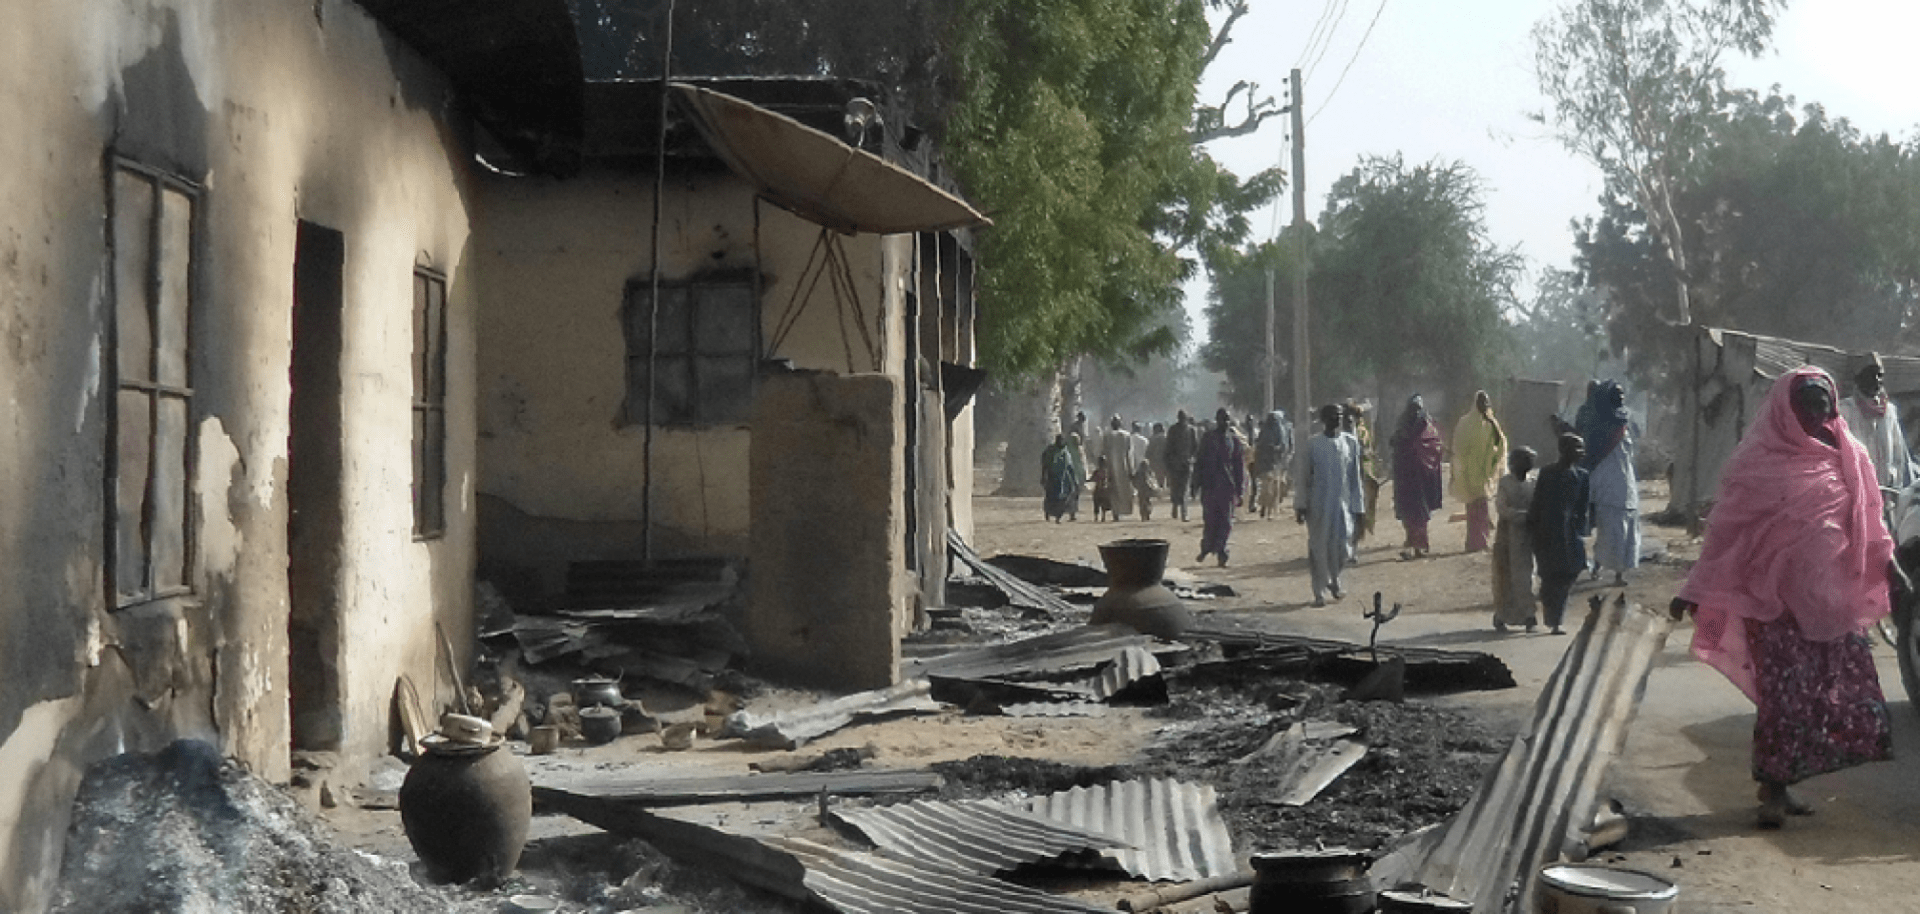 Over the past few months, Nigeria has experienced an uptick in attacks by Boko Haram in the country's northeast. 